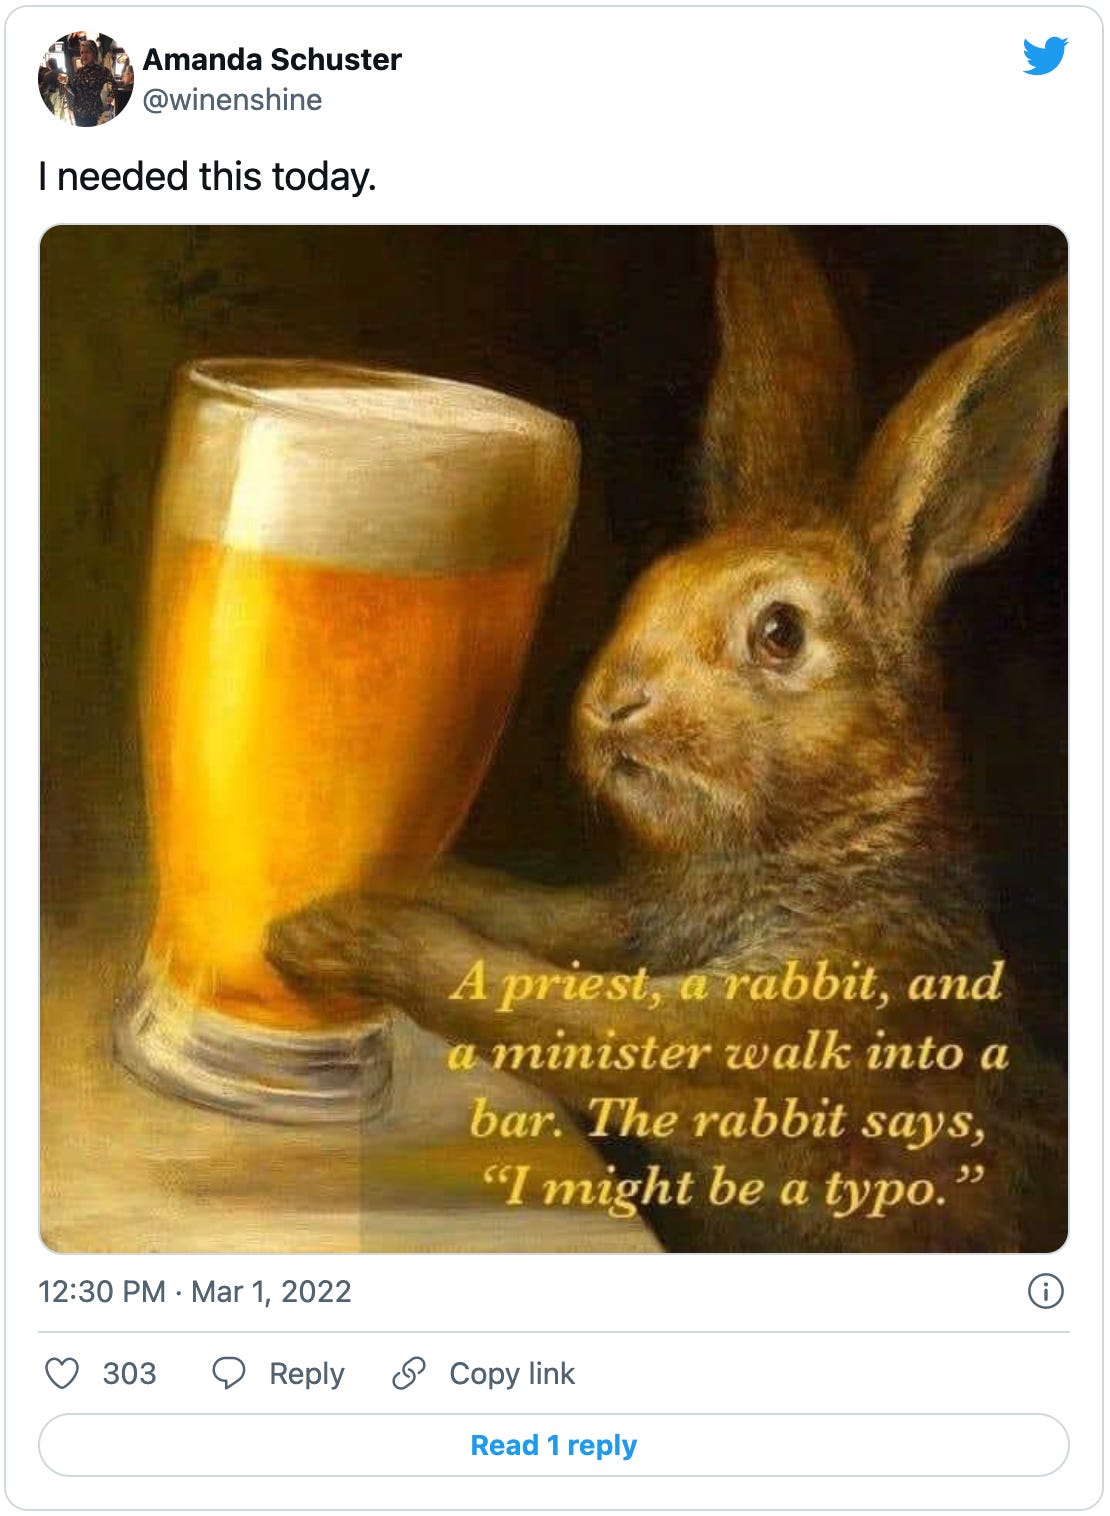 Tweet by @winenshine: “I needed this today” with a picture of a rabbit holding a glass of beer, captioned “A priest, a rabbit , and a minister walk into a bar. he rabbit says ‘I might be a typo.’”